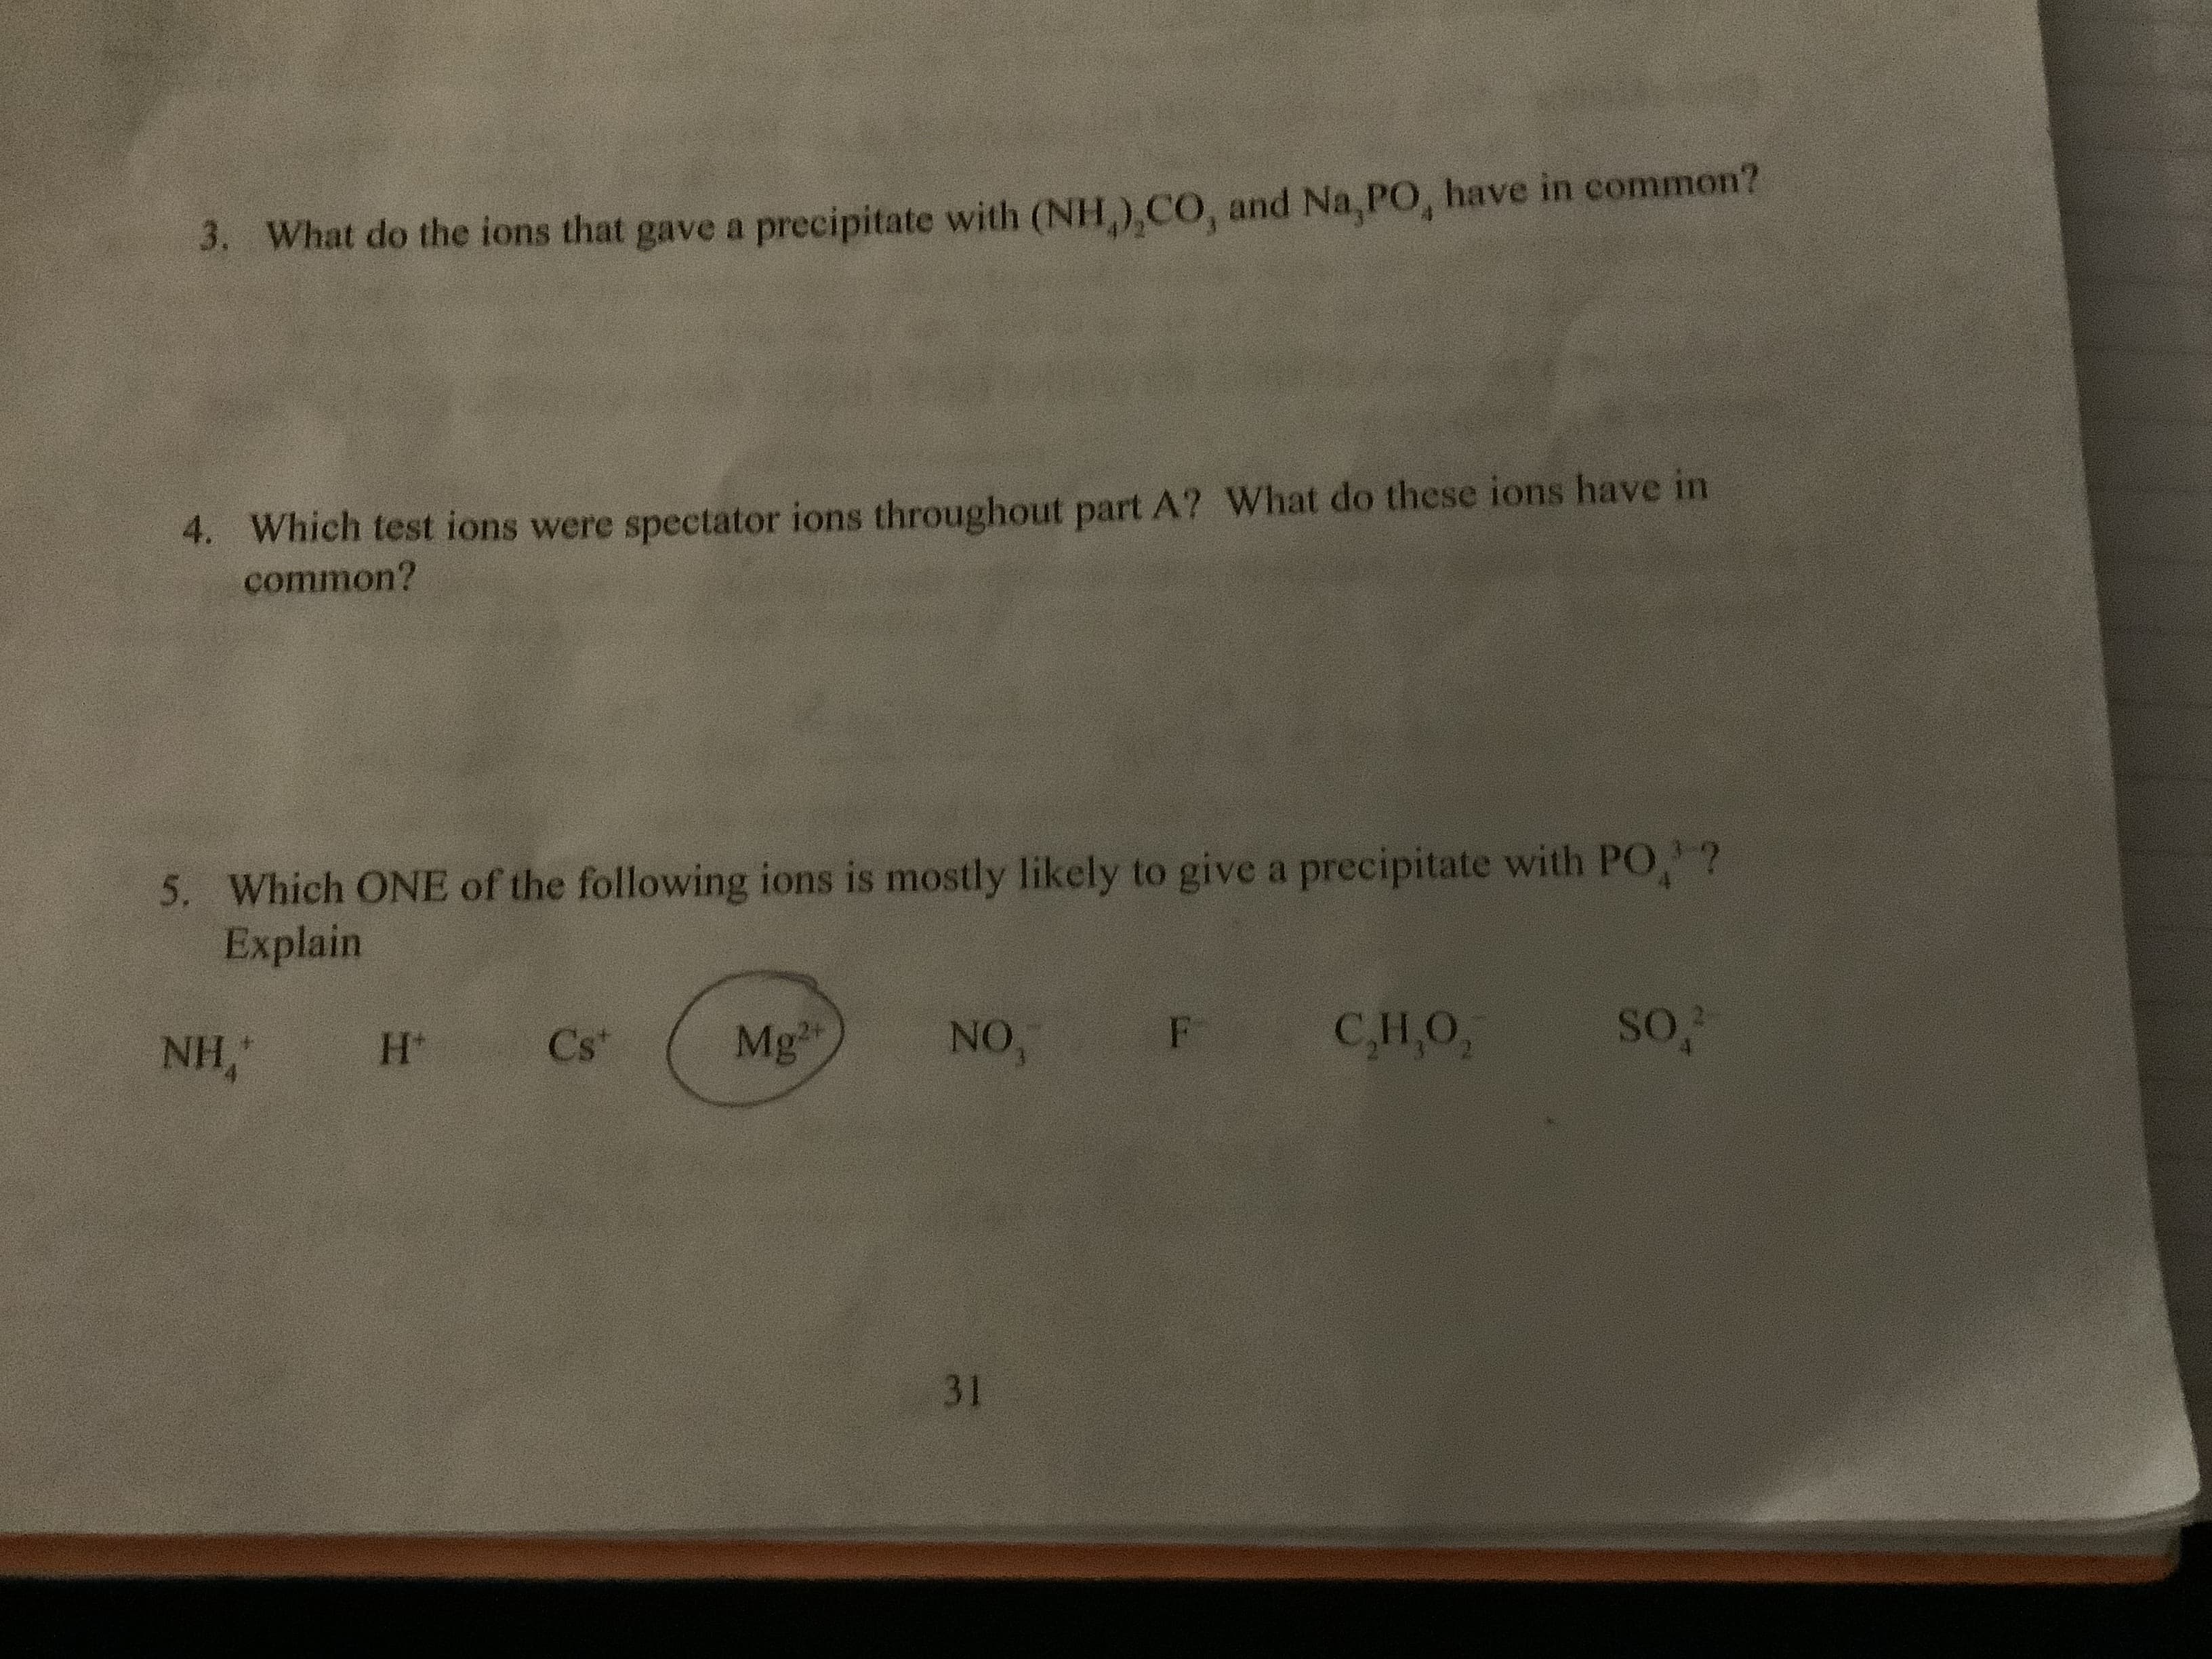 What do the ions that gave a precipitate with (NH),CO, and Na, PO, have in common?
3.
4. Which test ions were spectator ions throughout part A? What do these ions have i
common?
5. Which ONE of the following ions is mostly likely to give a precipitate with PO,?
Explain
F CH,O,
NO,
Mg
Cs
NH,
H*
31
